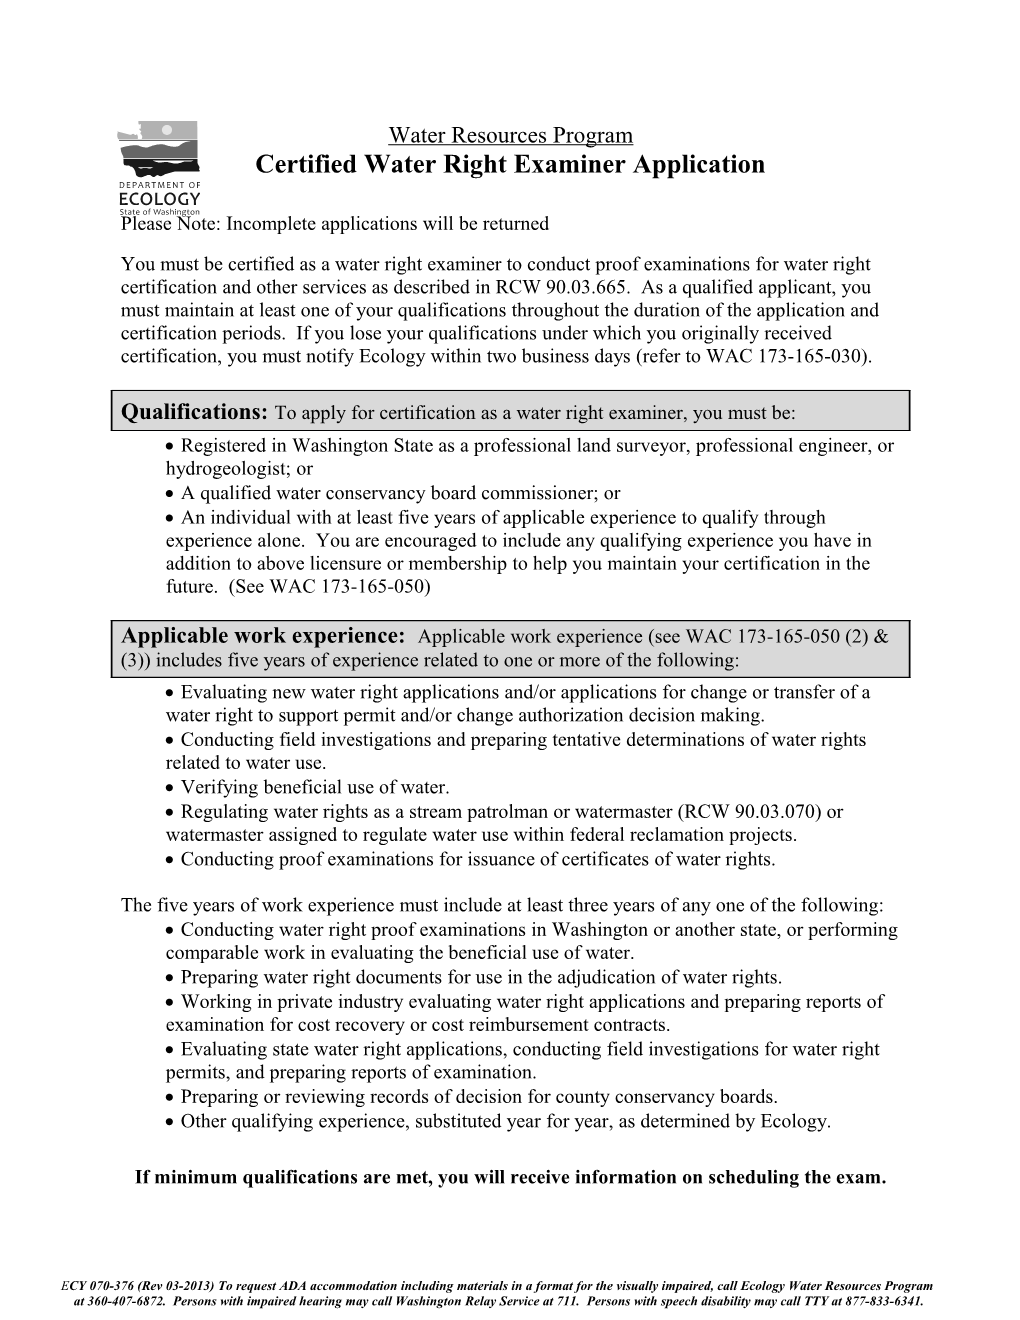 Certified Water Right Examiner Application